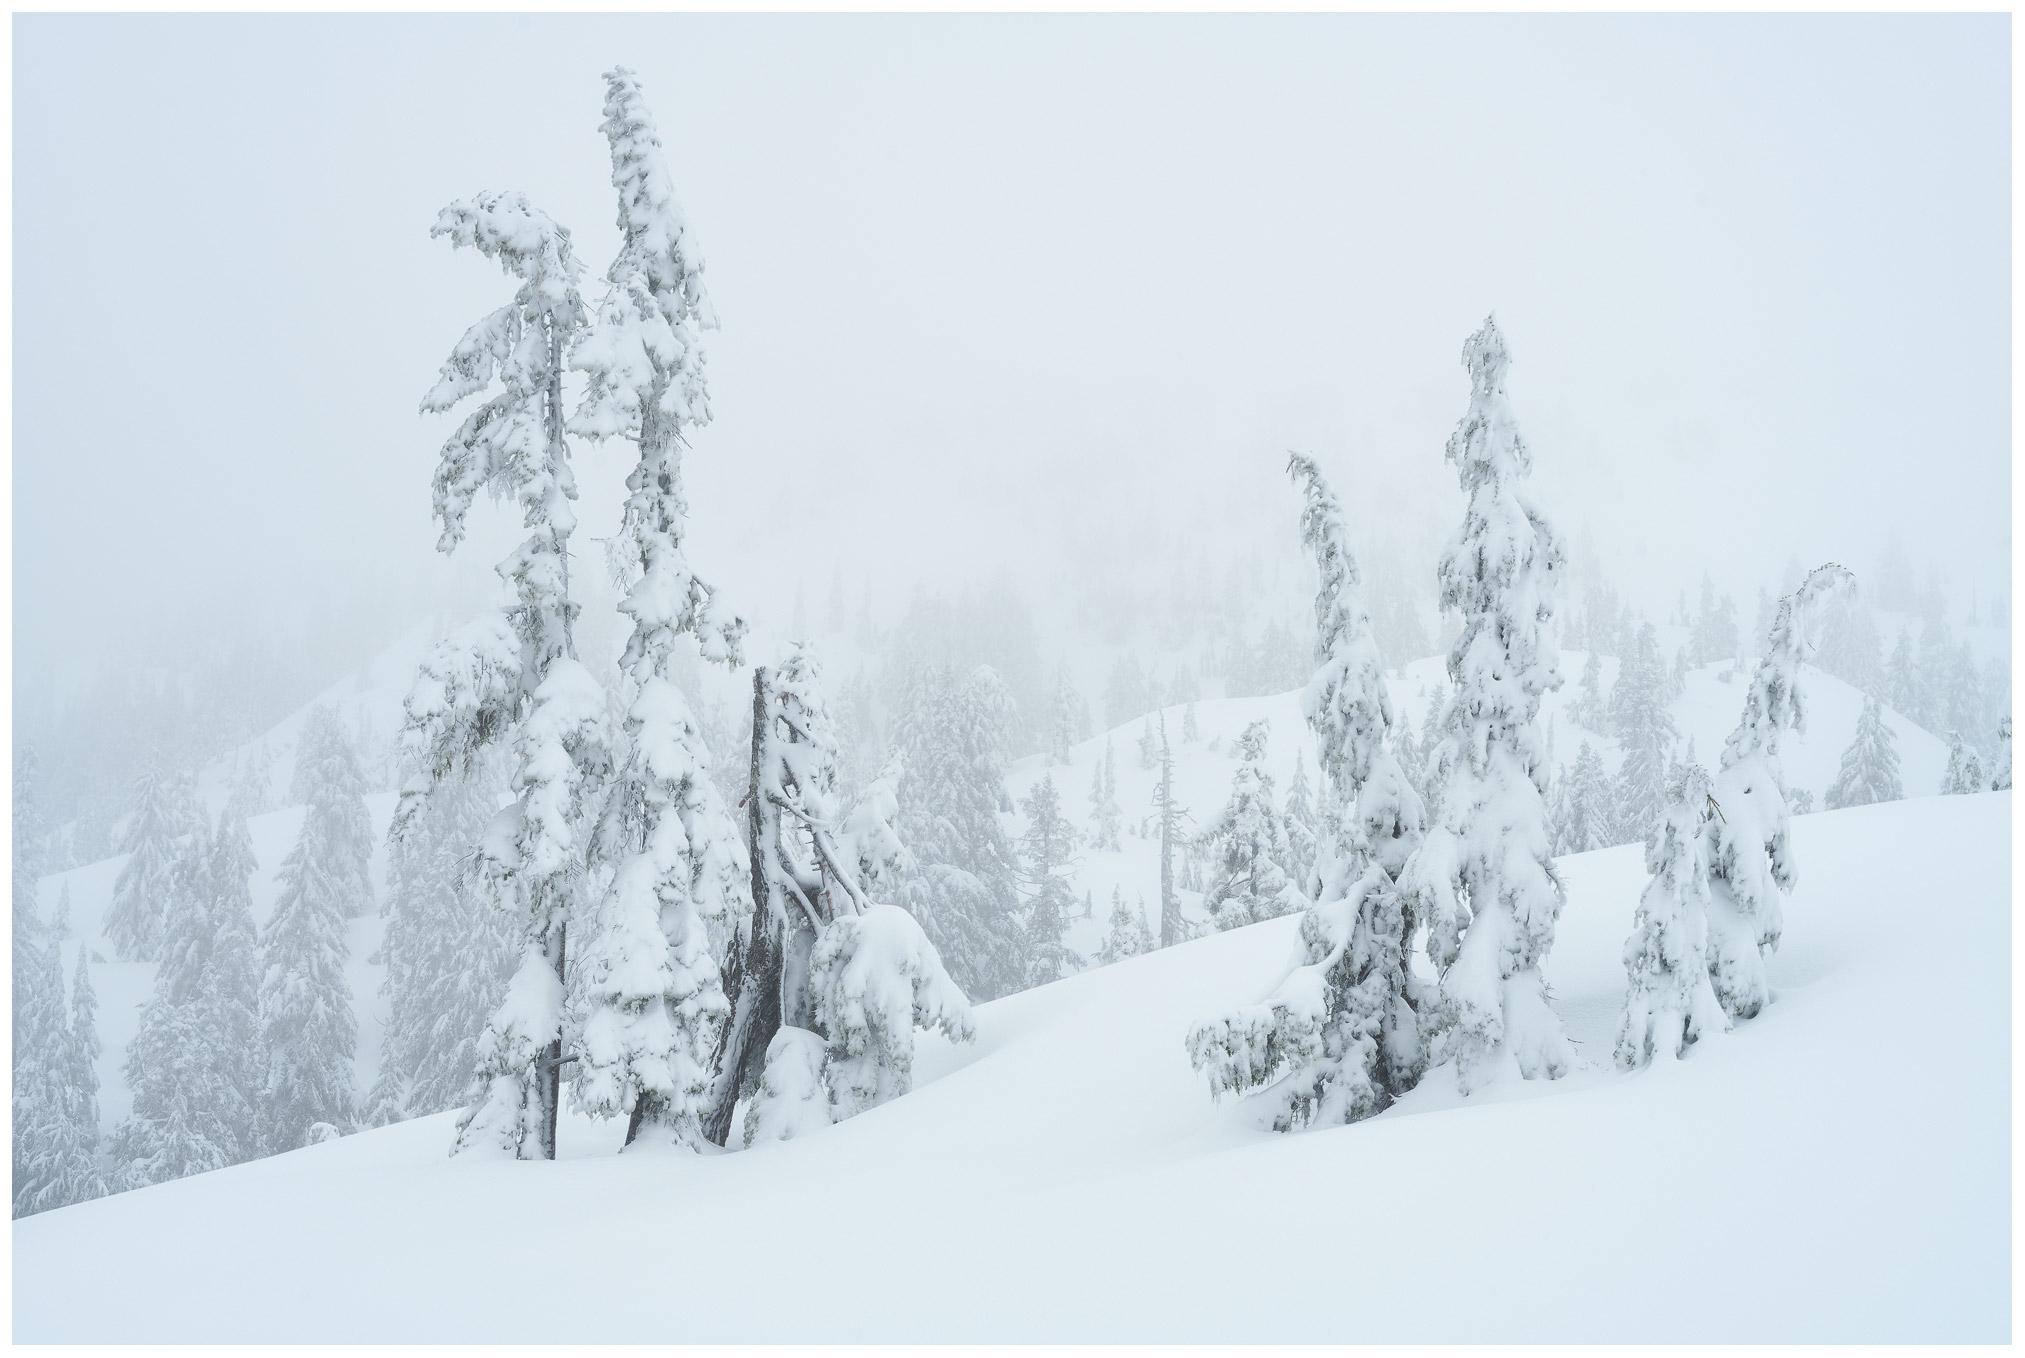 A mixture of fog and falling snow slowly transforms the landscape into a winter wonderland.